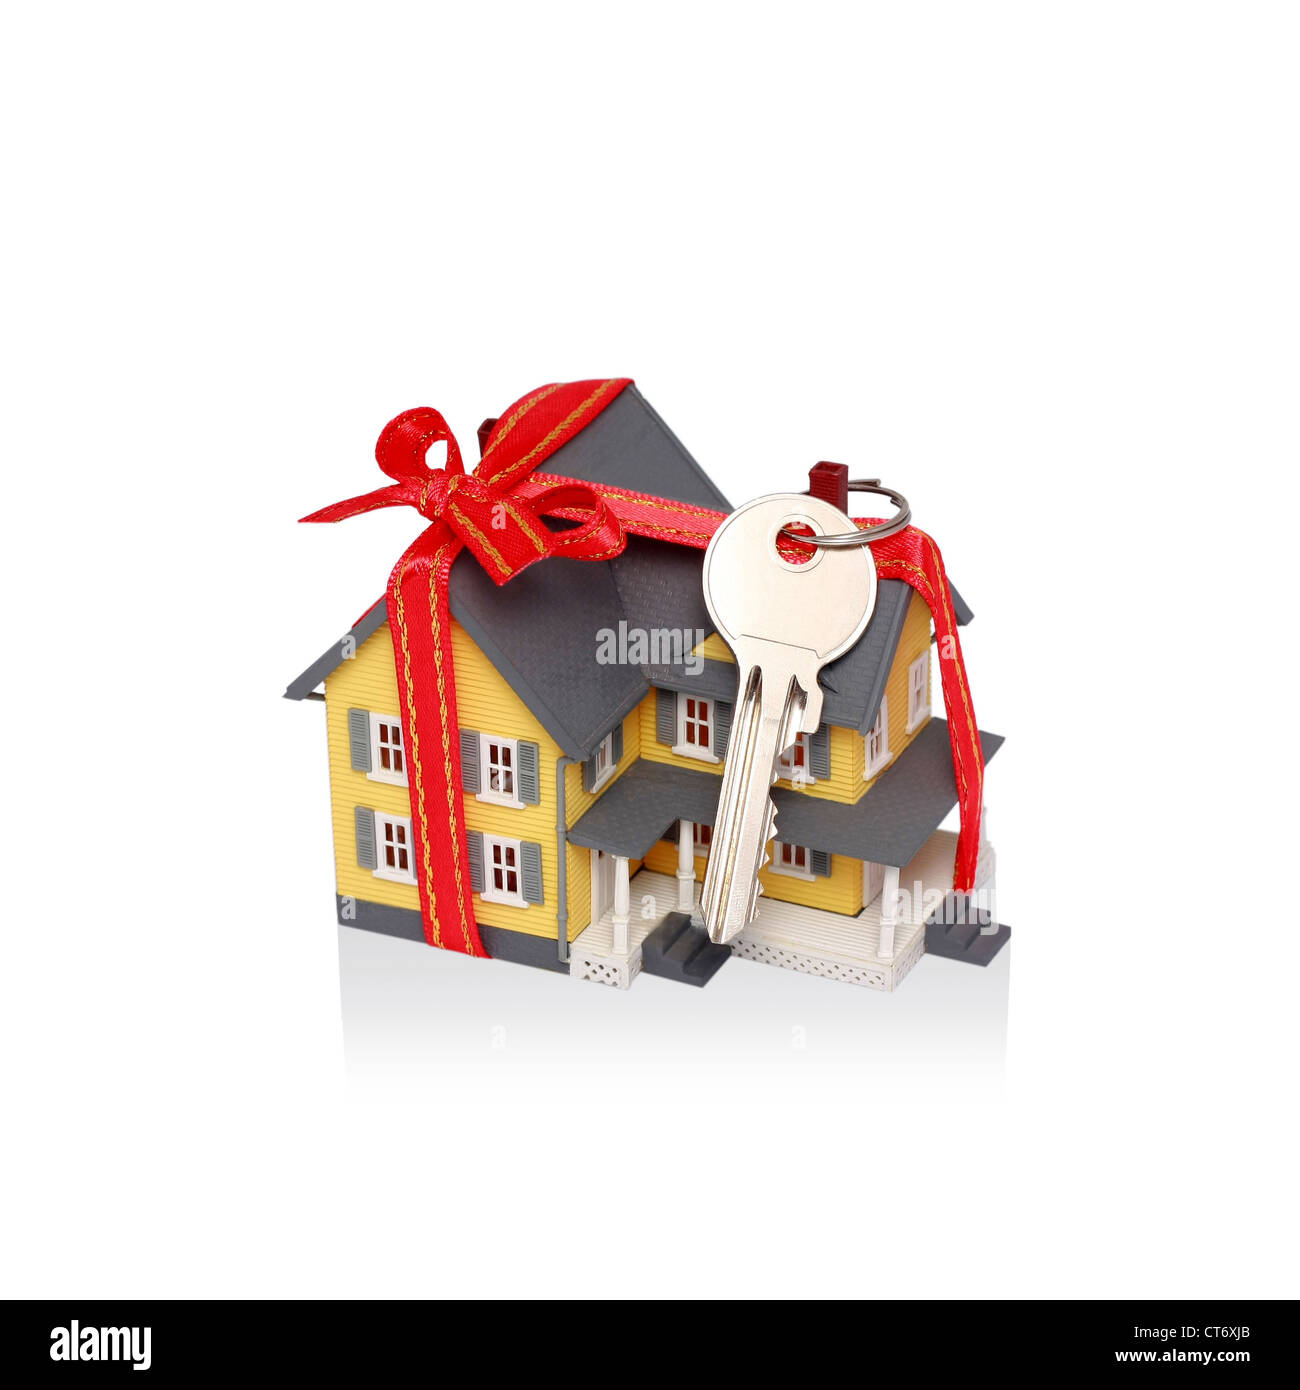 House gift Stock Photos, Royalty Free House gift Images